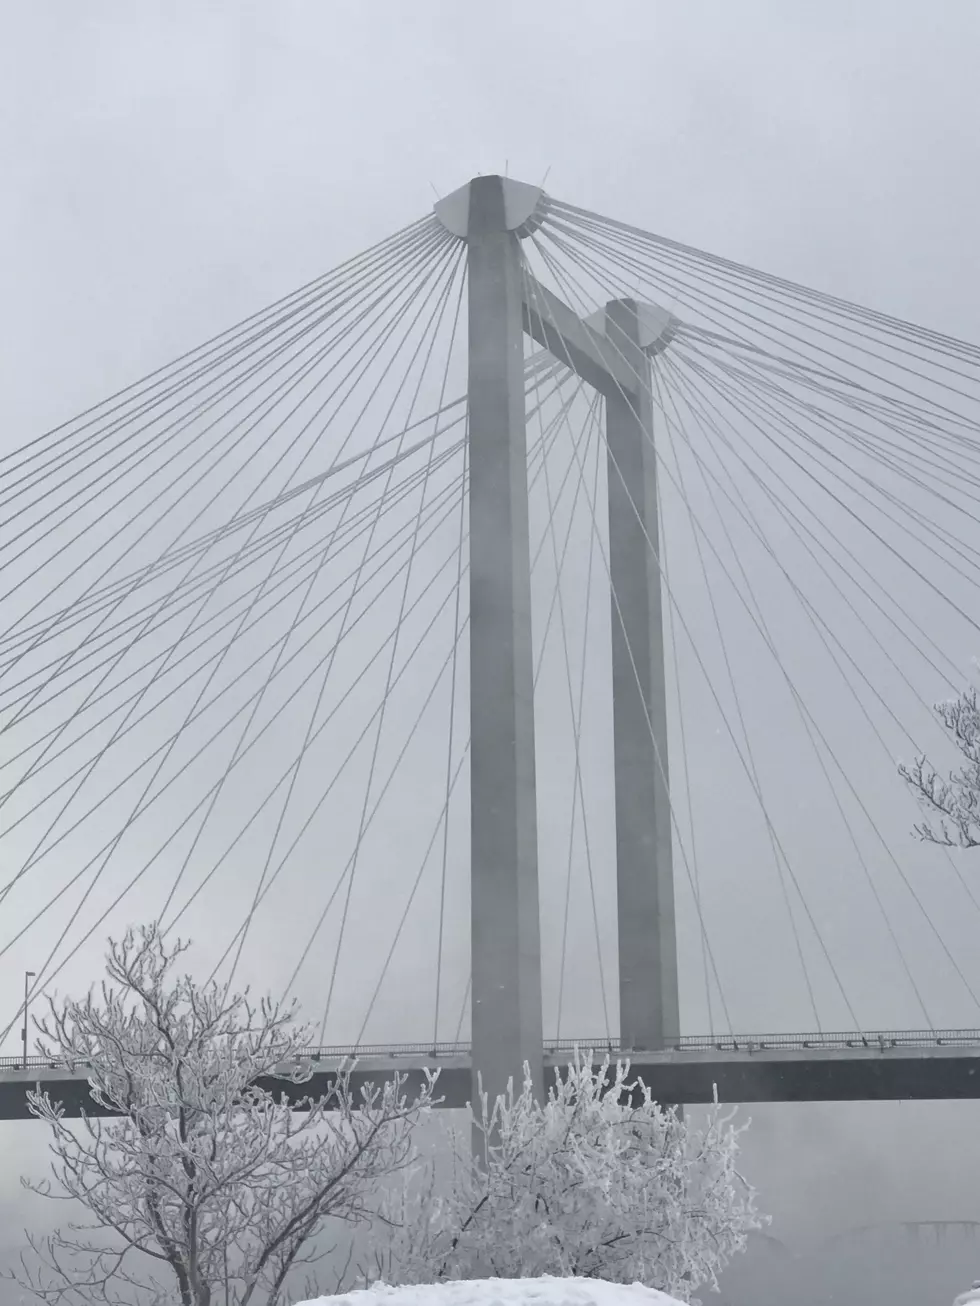 Human Trafficking Walk Over the Cable Bridge is This Friday January 11